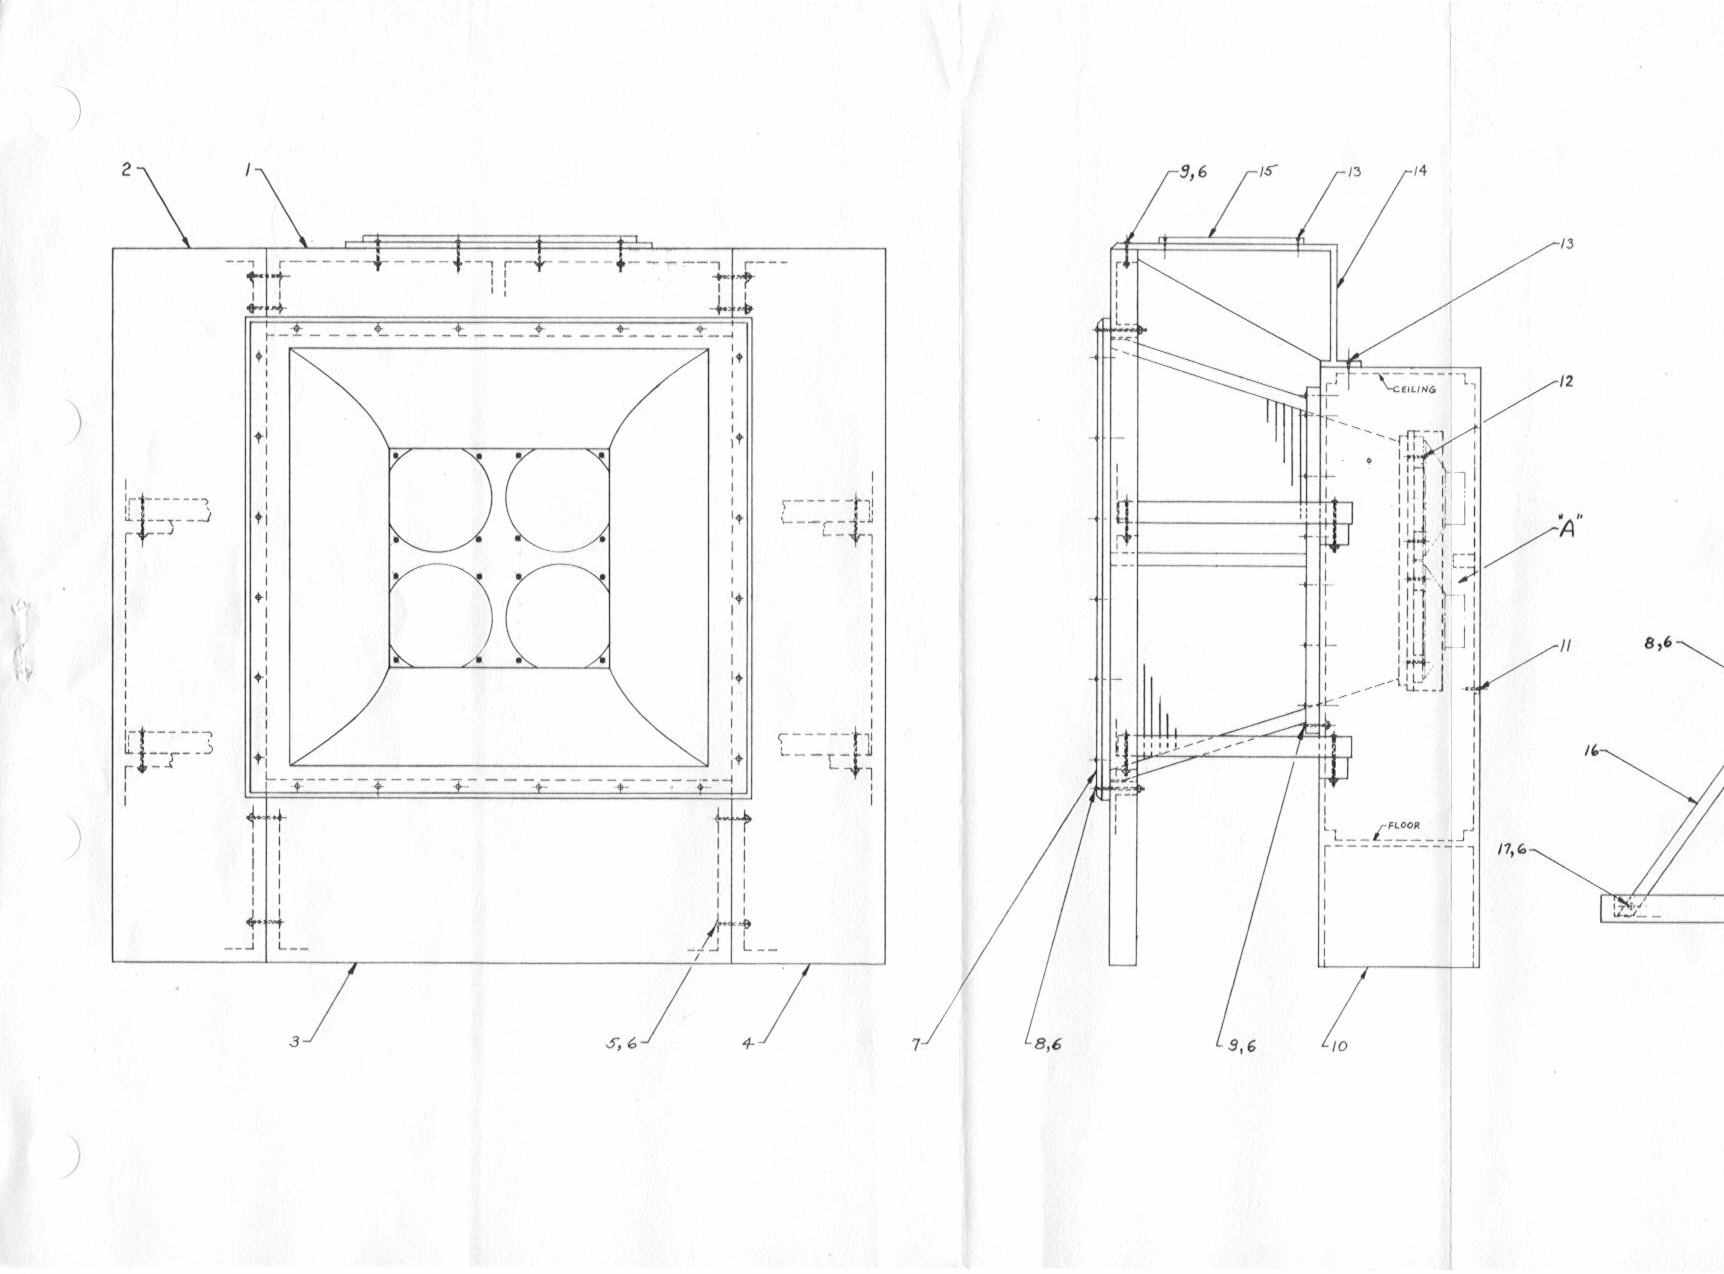 Westrex - T550A Cabinet - Drawing 6